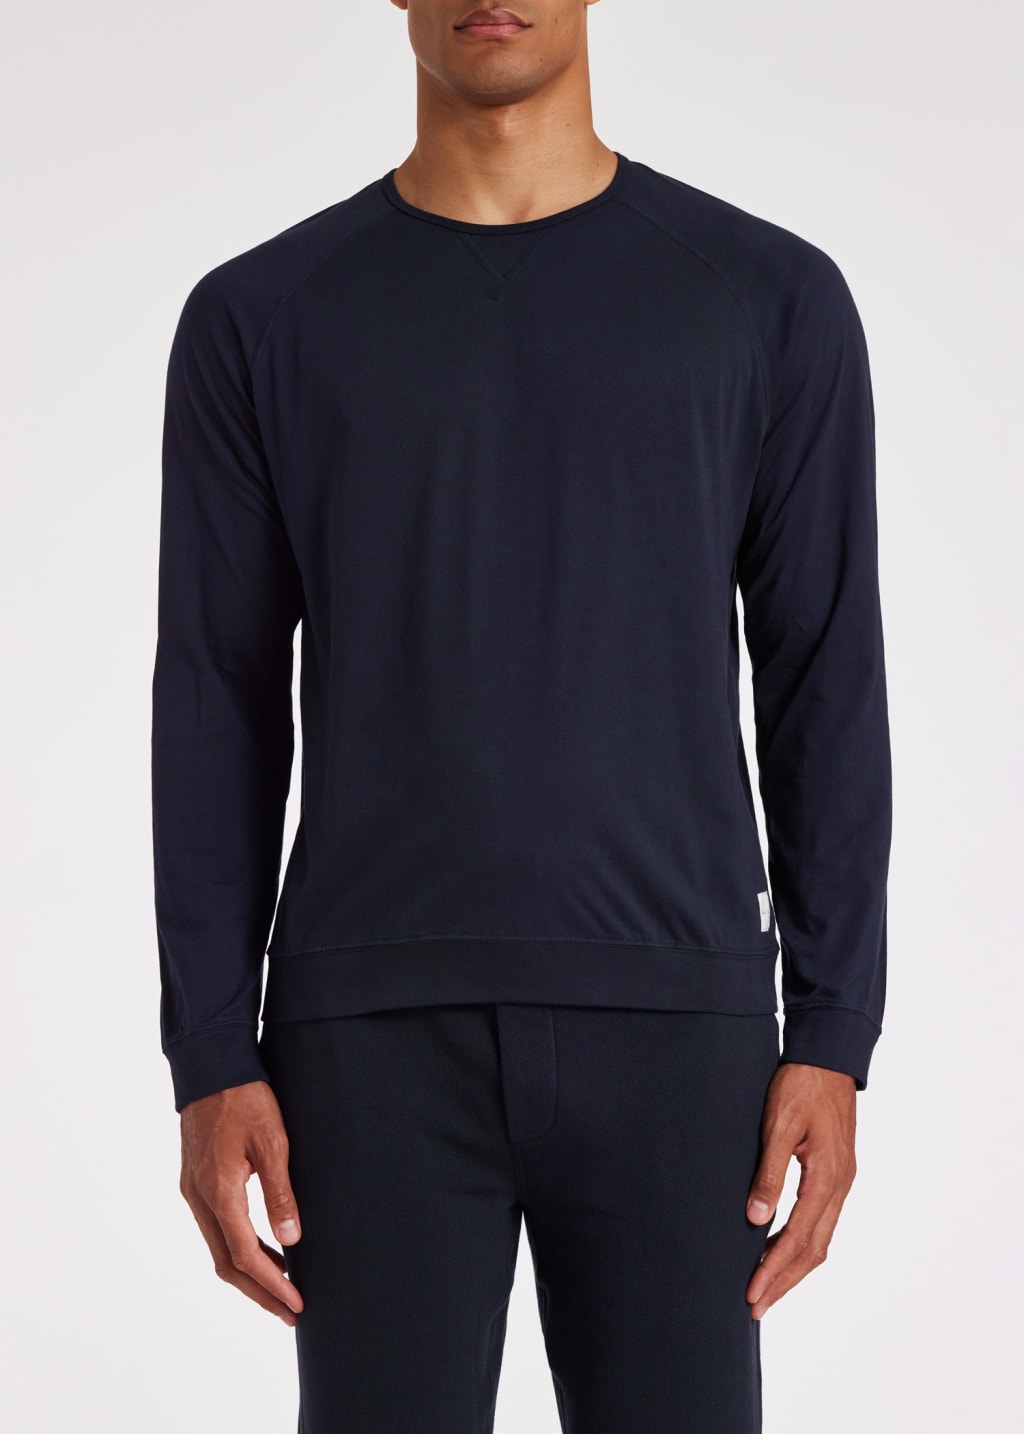 Model front view - - Navy Jersey Cotton Long-Sleeve Lounge Top Paul Smith